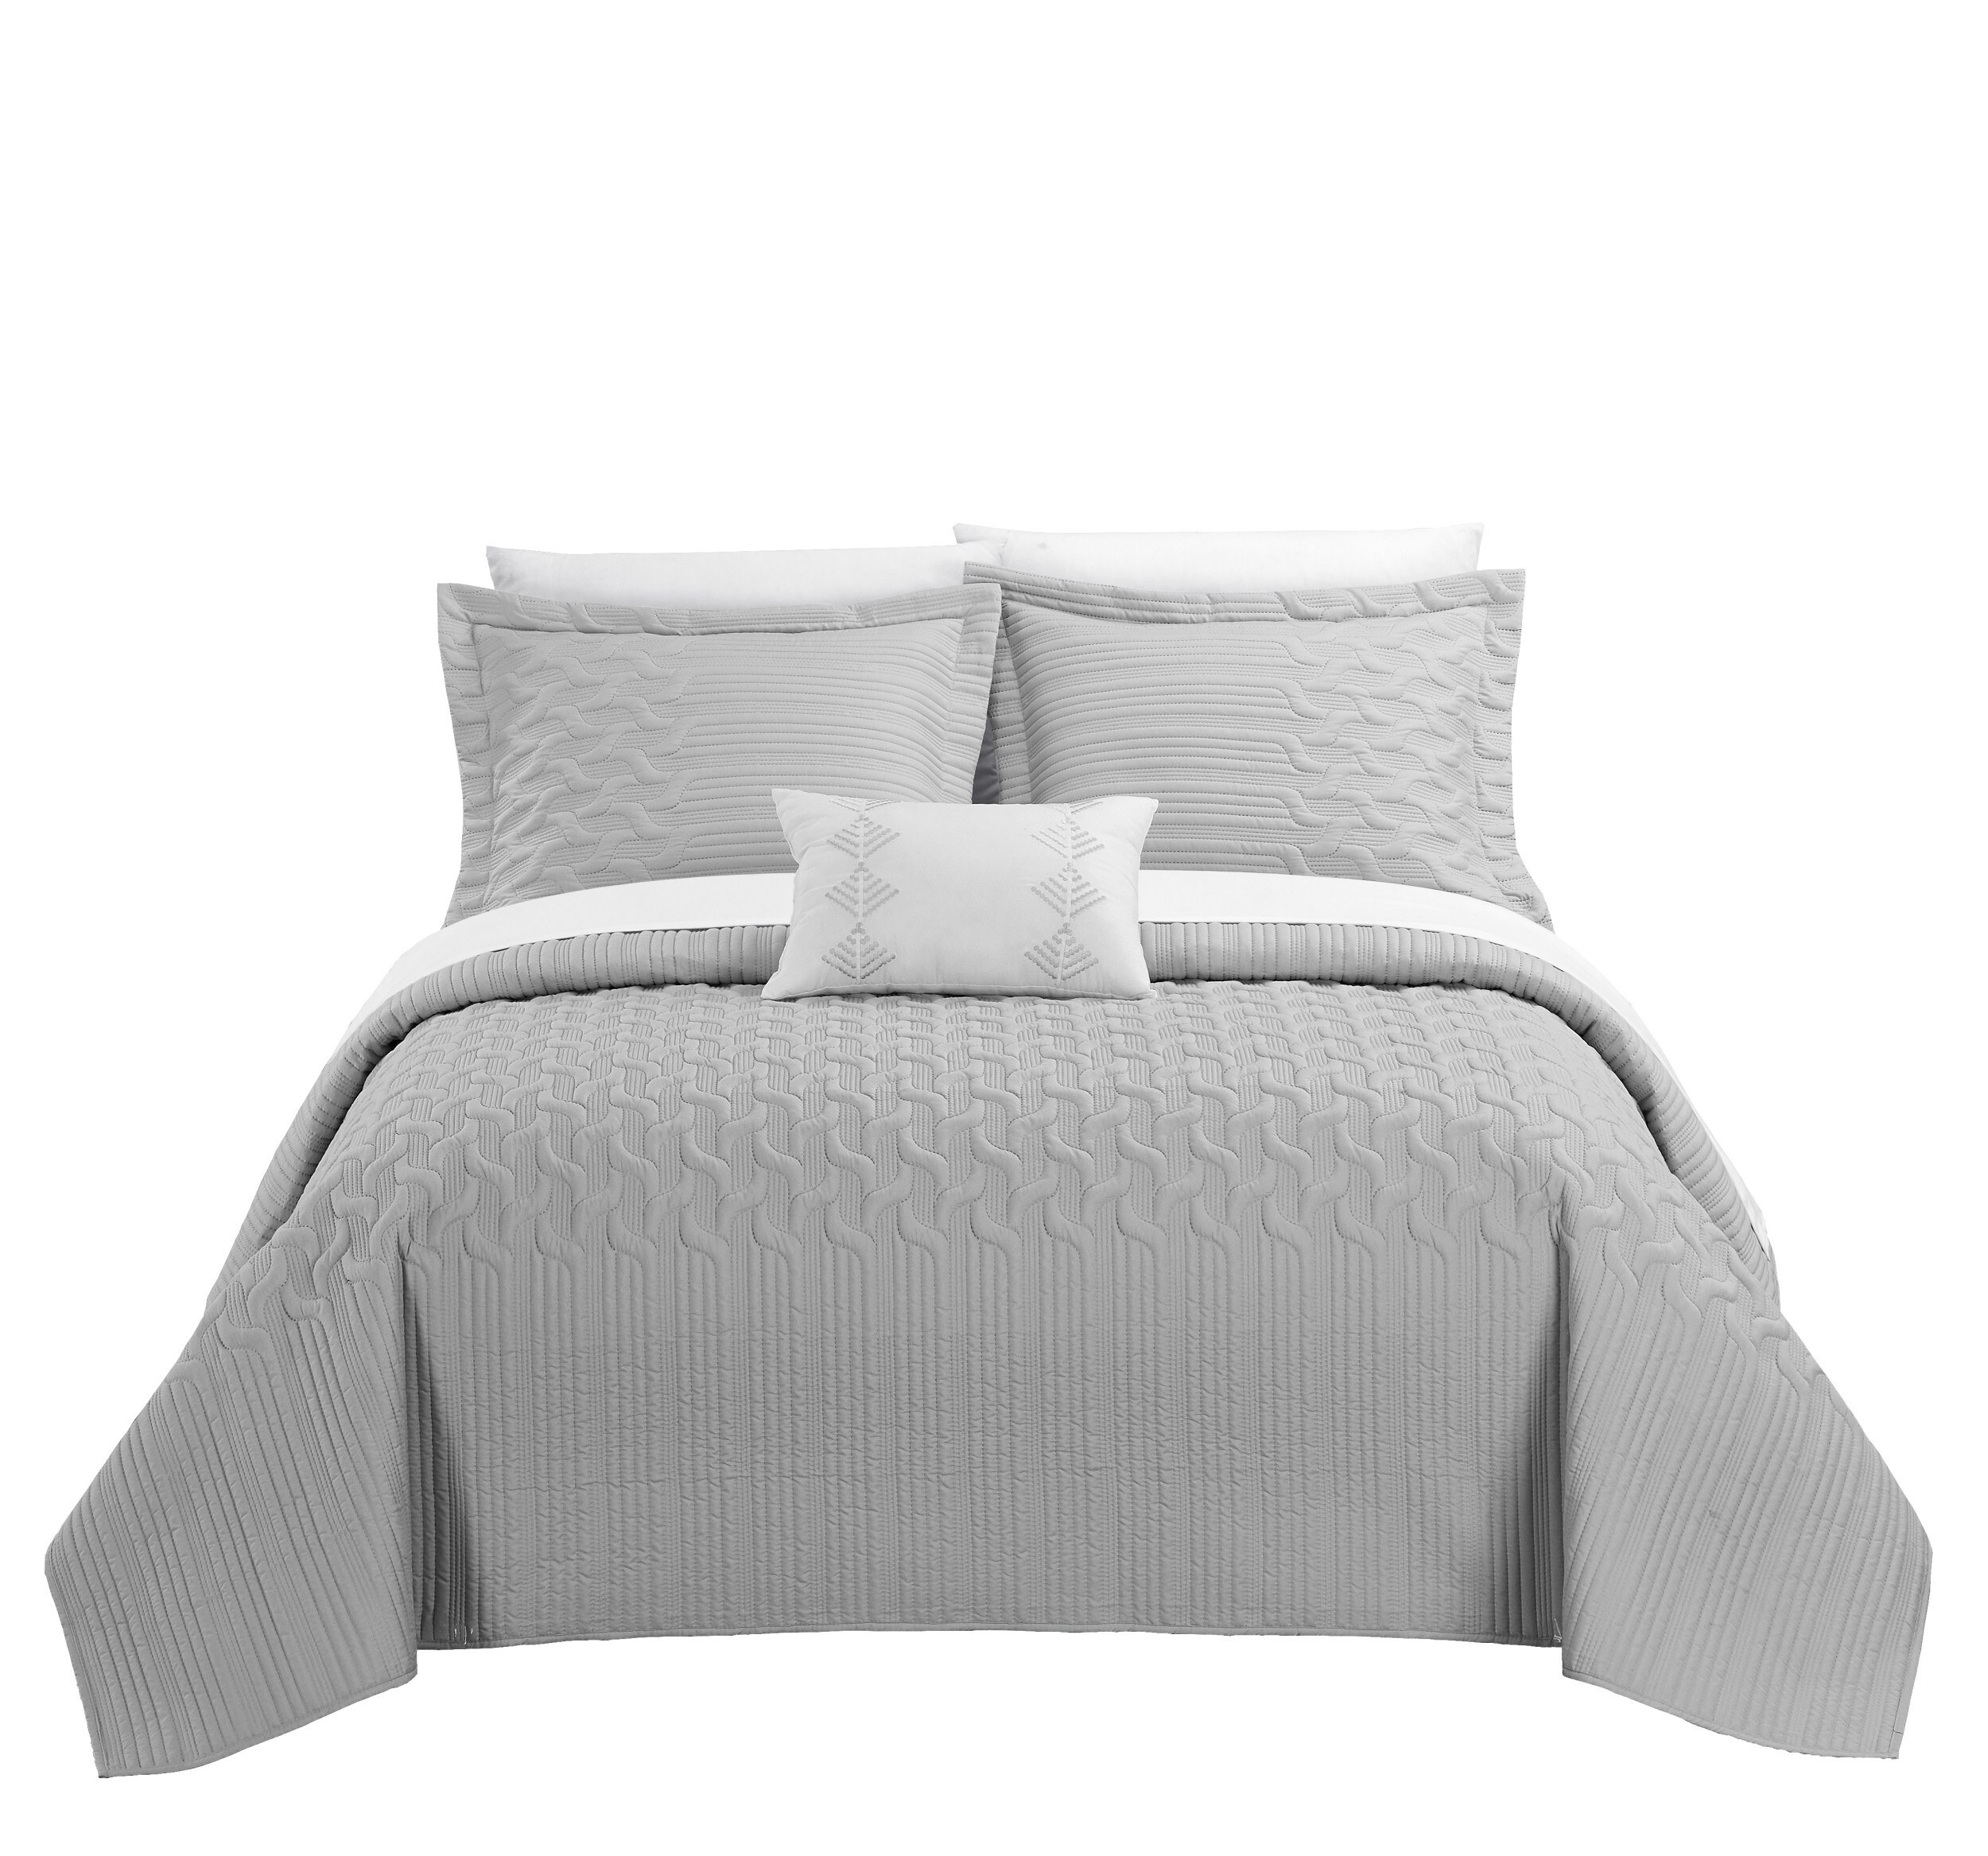 Chic Home Design Shalya 4-Piece Grey Queen Quilt Set at Lowes.com